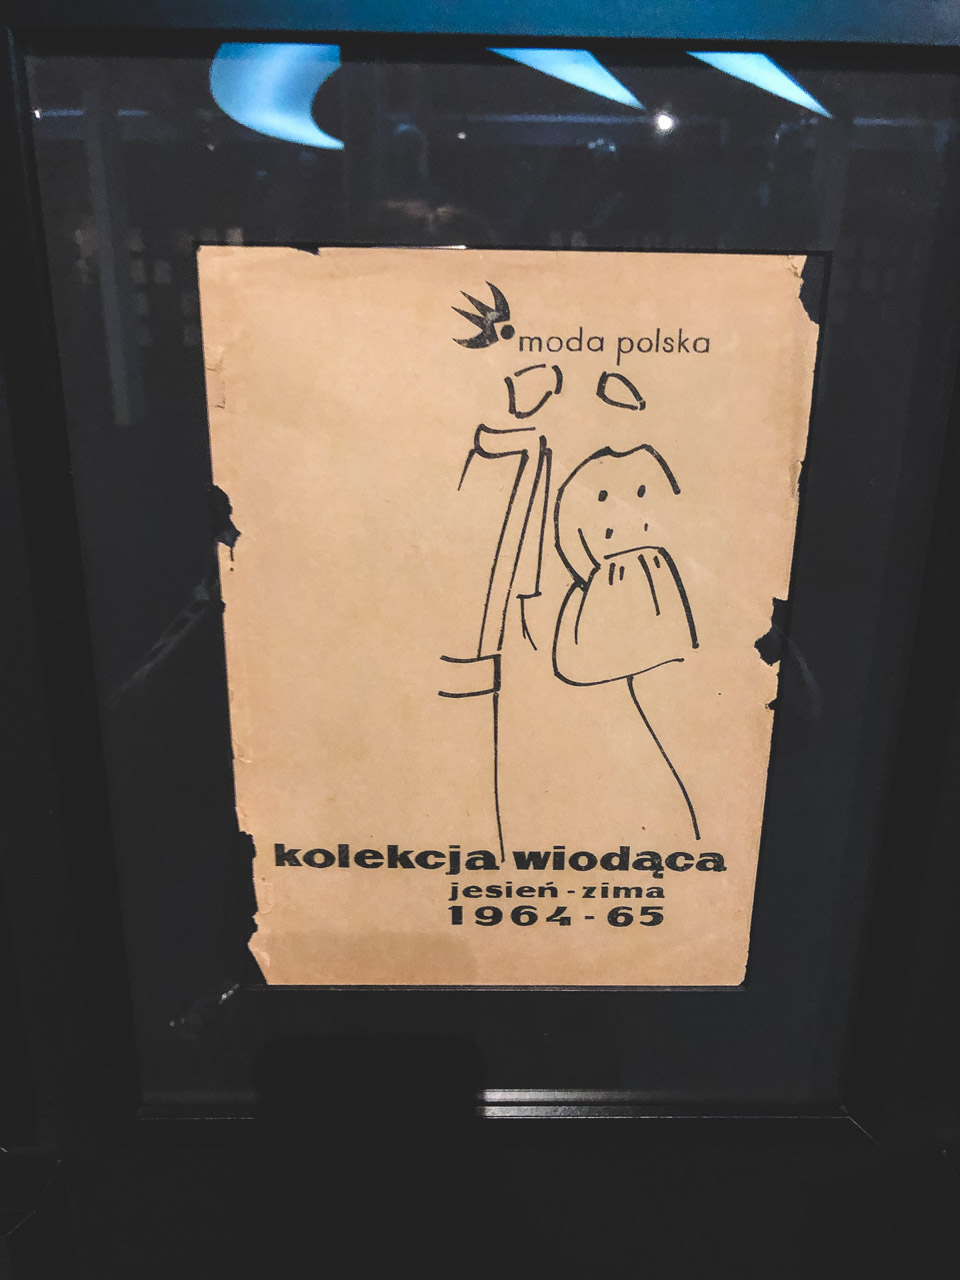 A graphic announcing the Autumn/Winter 1964/65 Moda Polska collection on display at The Central Museum of Textiles in Łódź, Poland